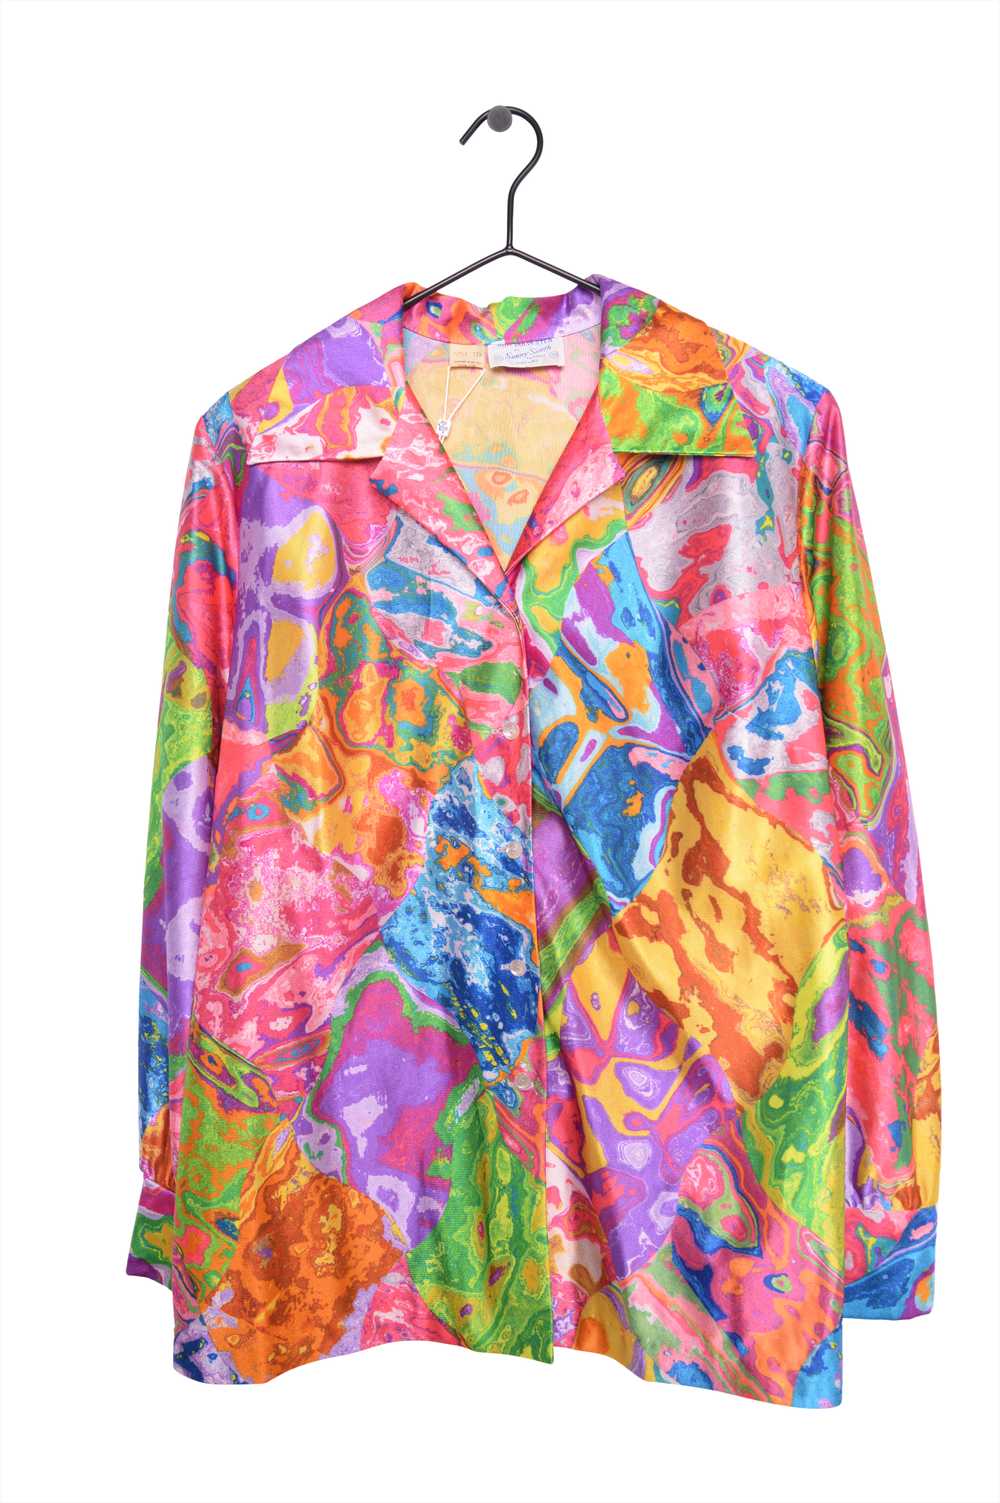 1970s Psychedelic Button Top 44928 - image 1